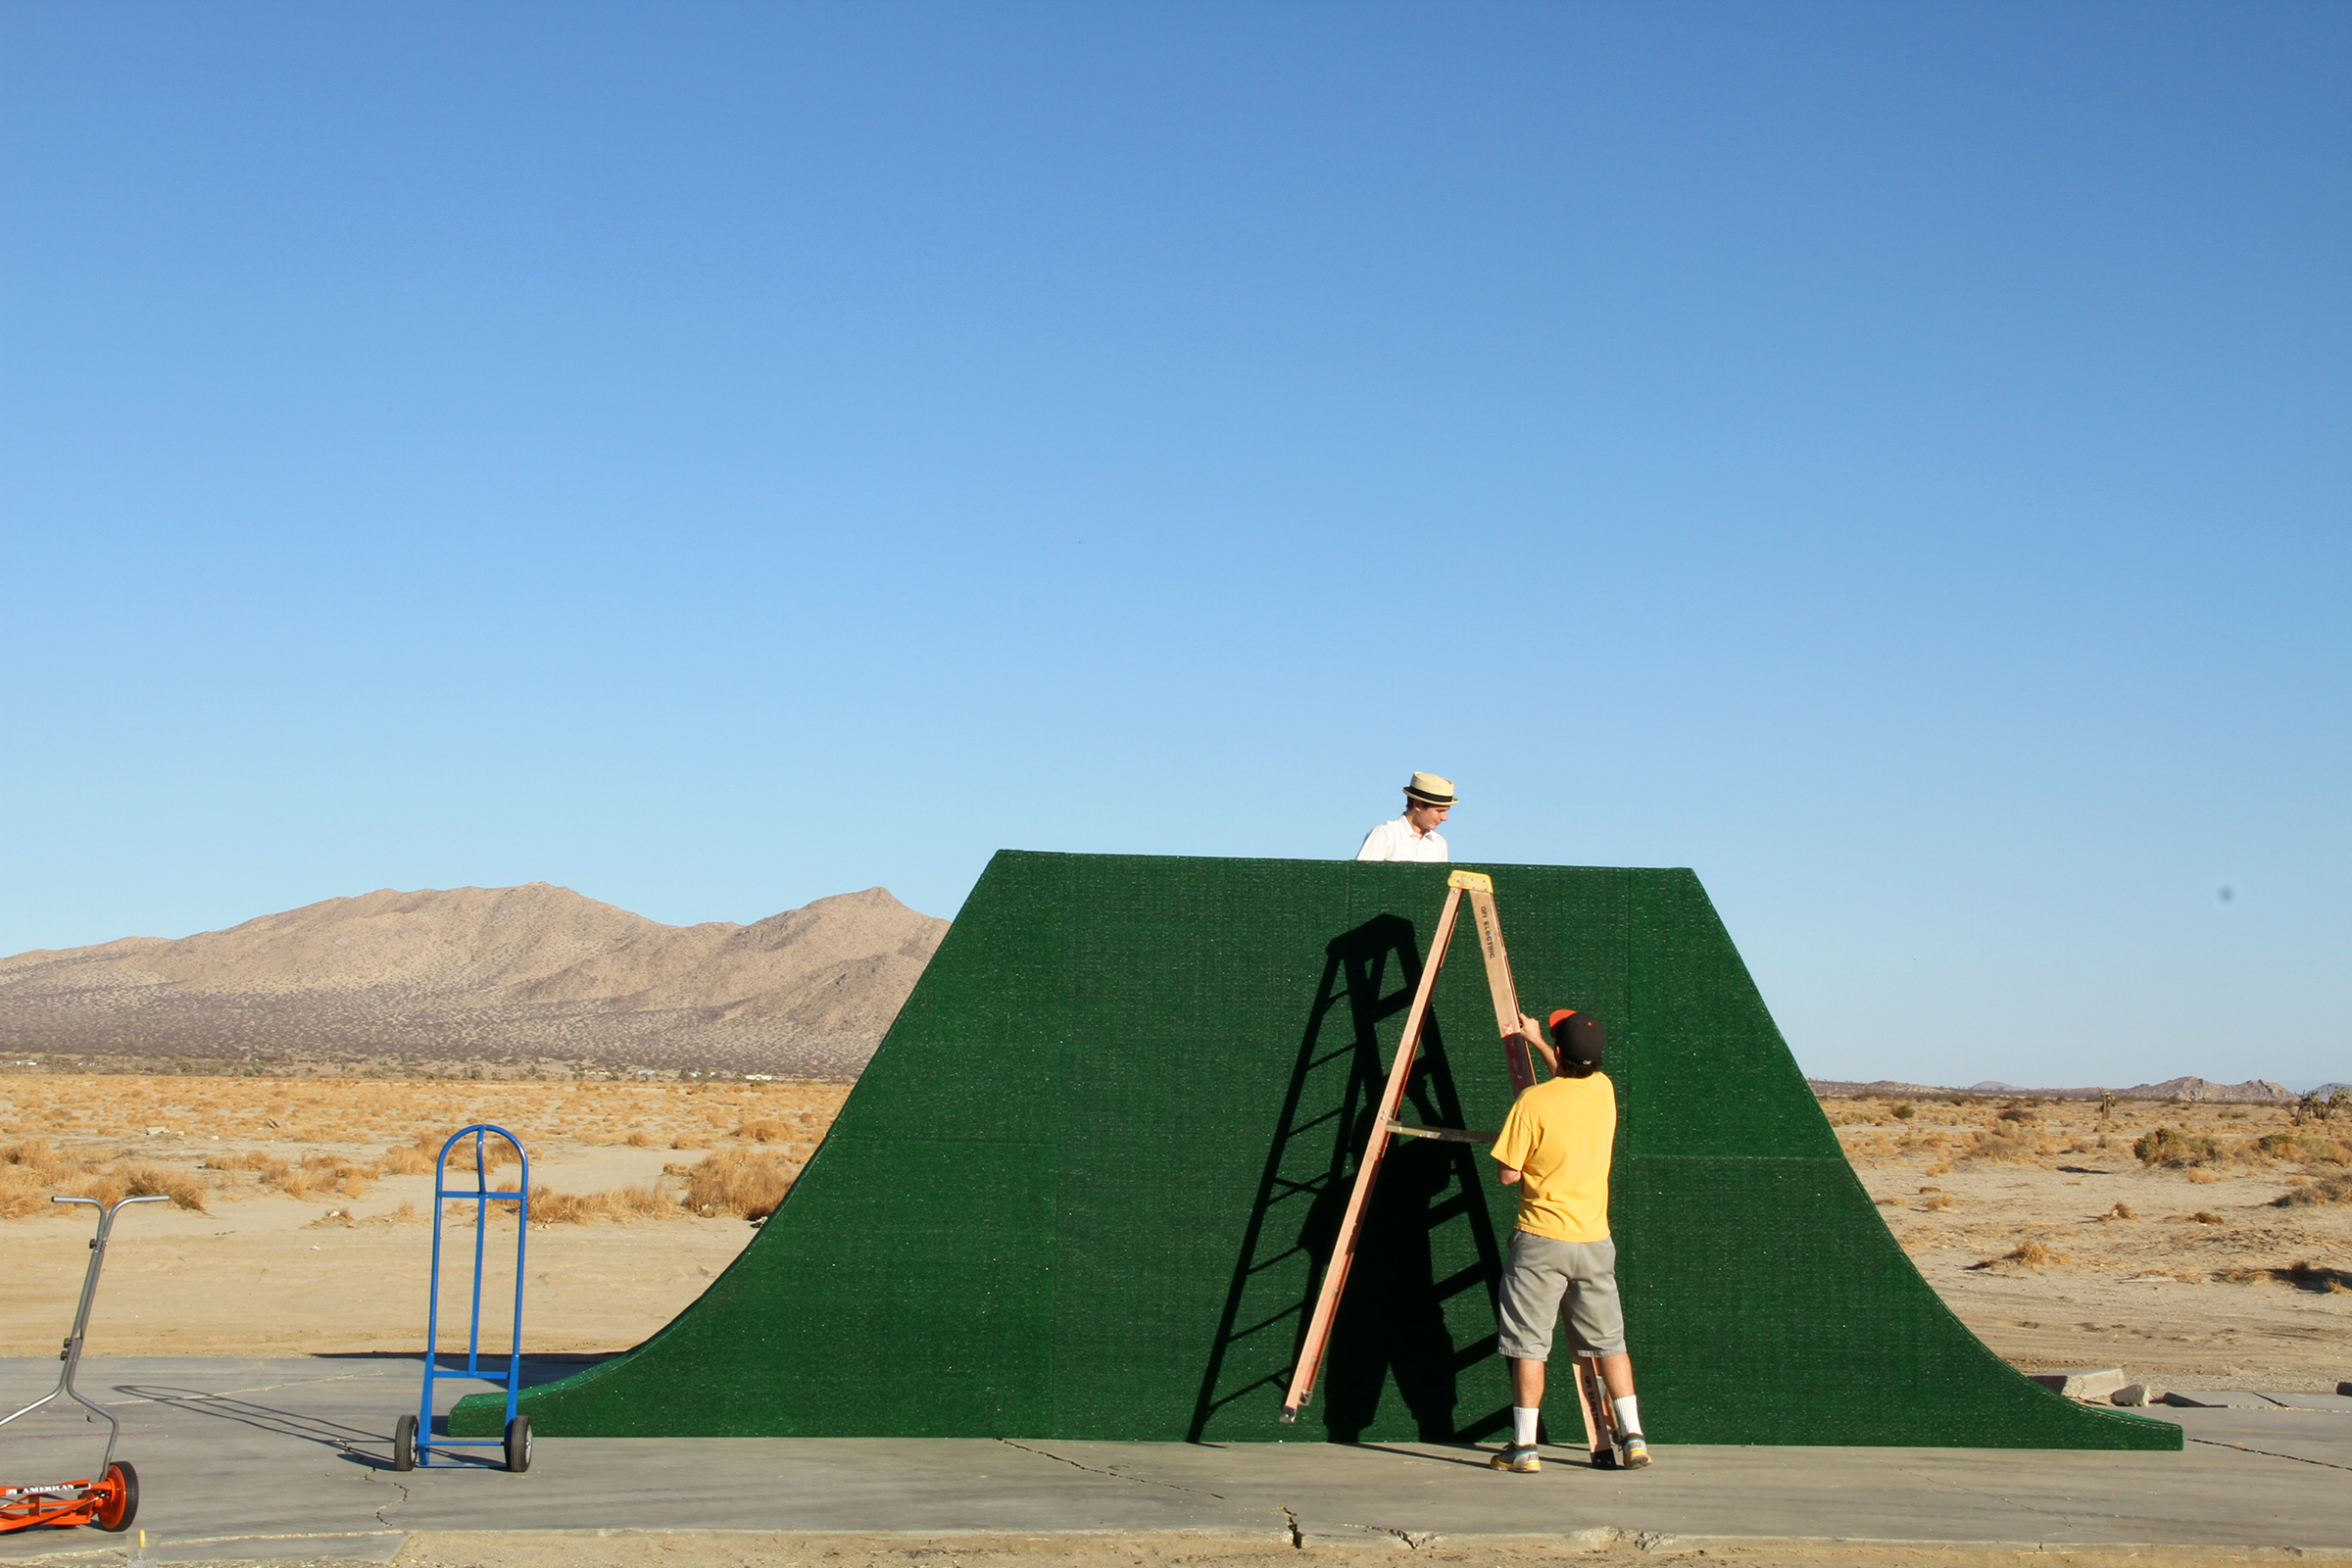 Two people assembling pieces of a large green sculpture in the middle of desert shrubland.